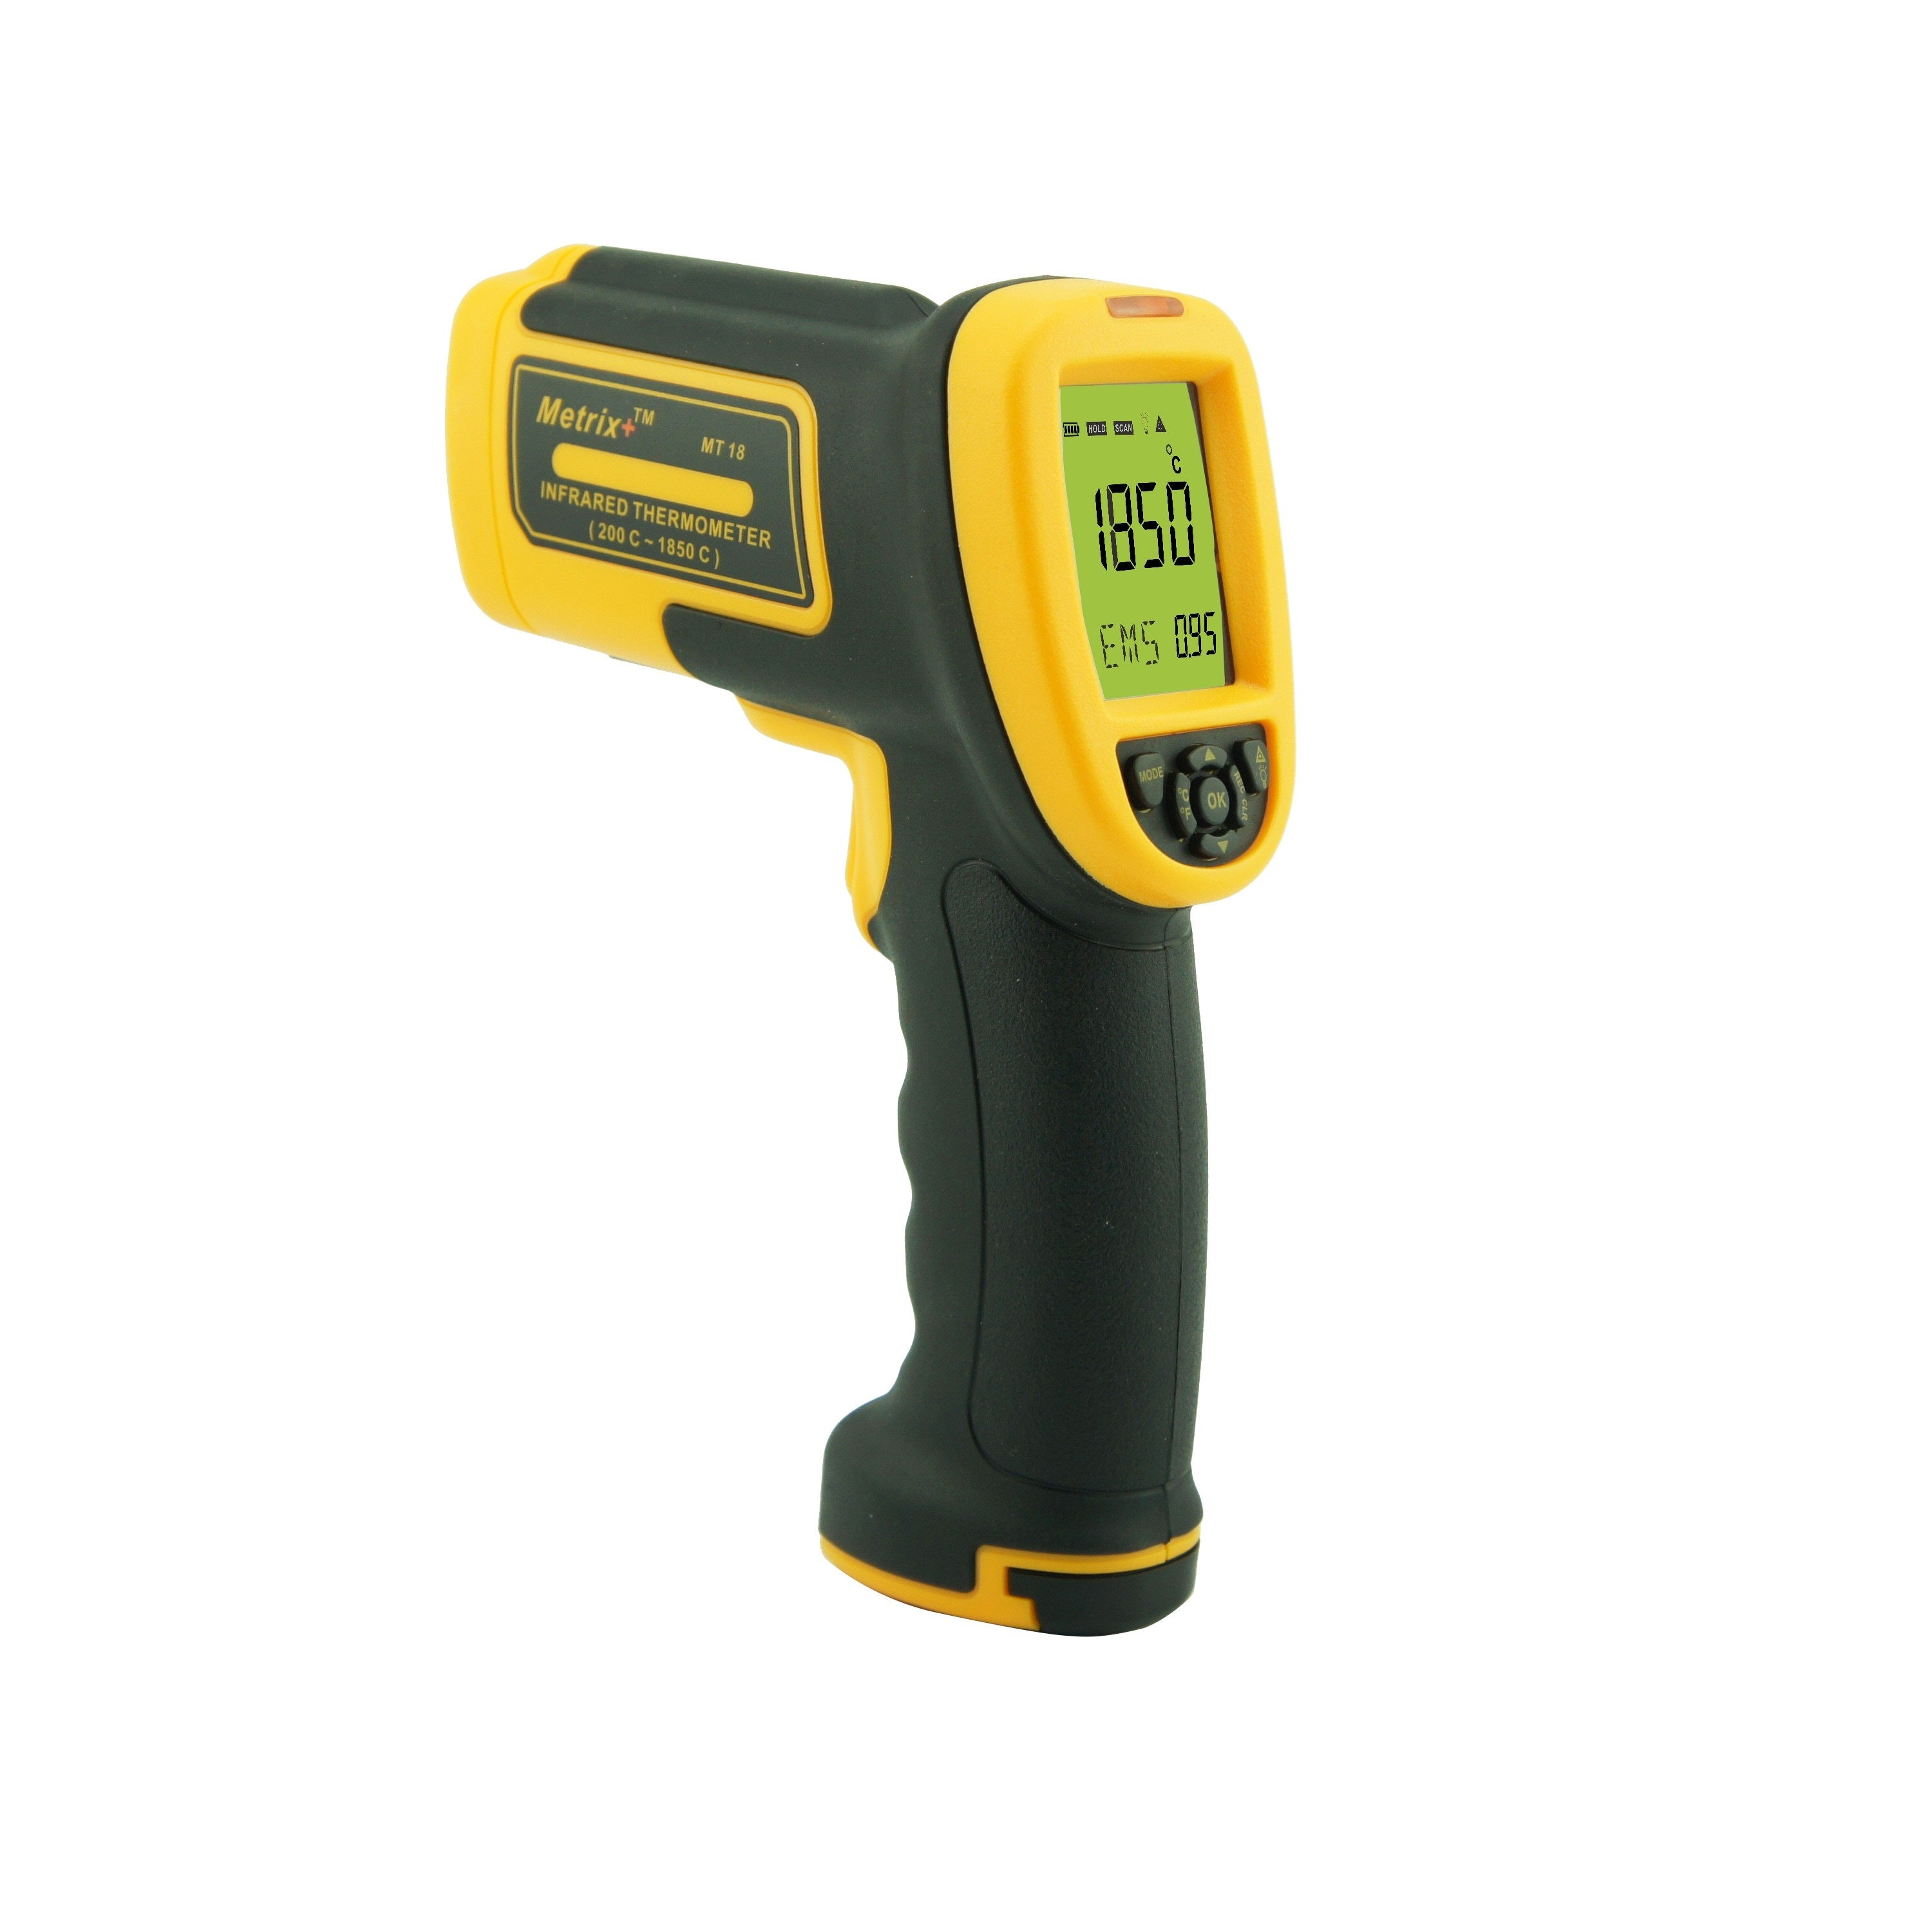 Metrix+ Rugged Infrared Thermometer MT 18